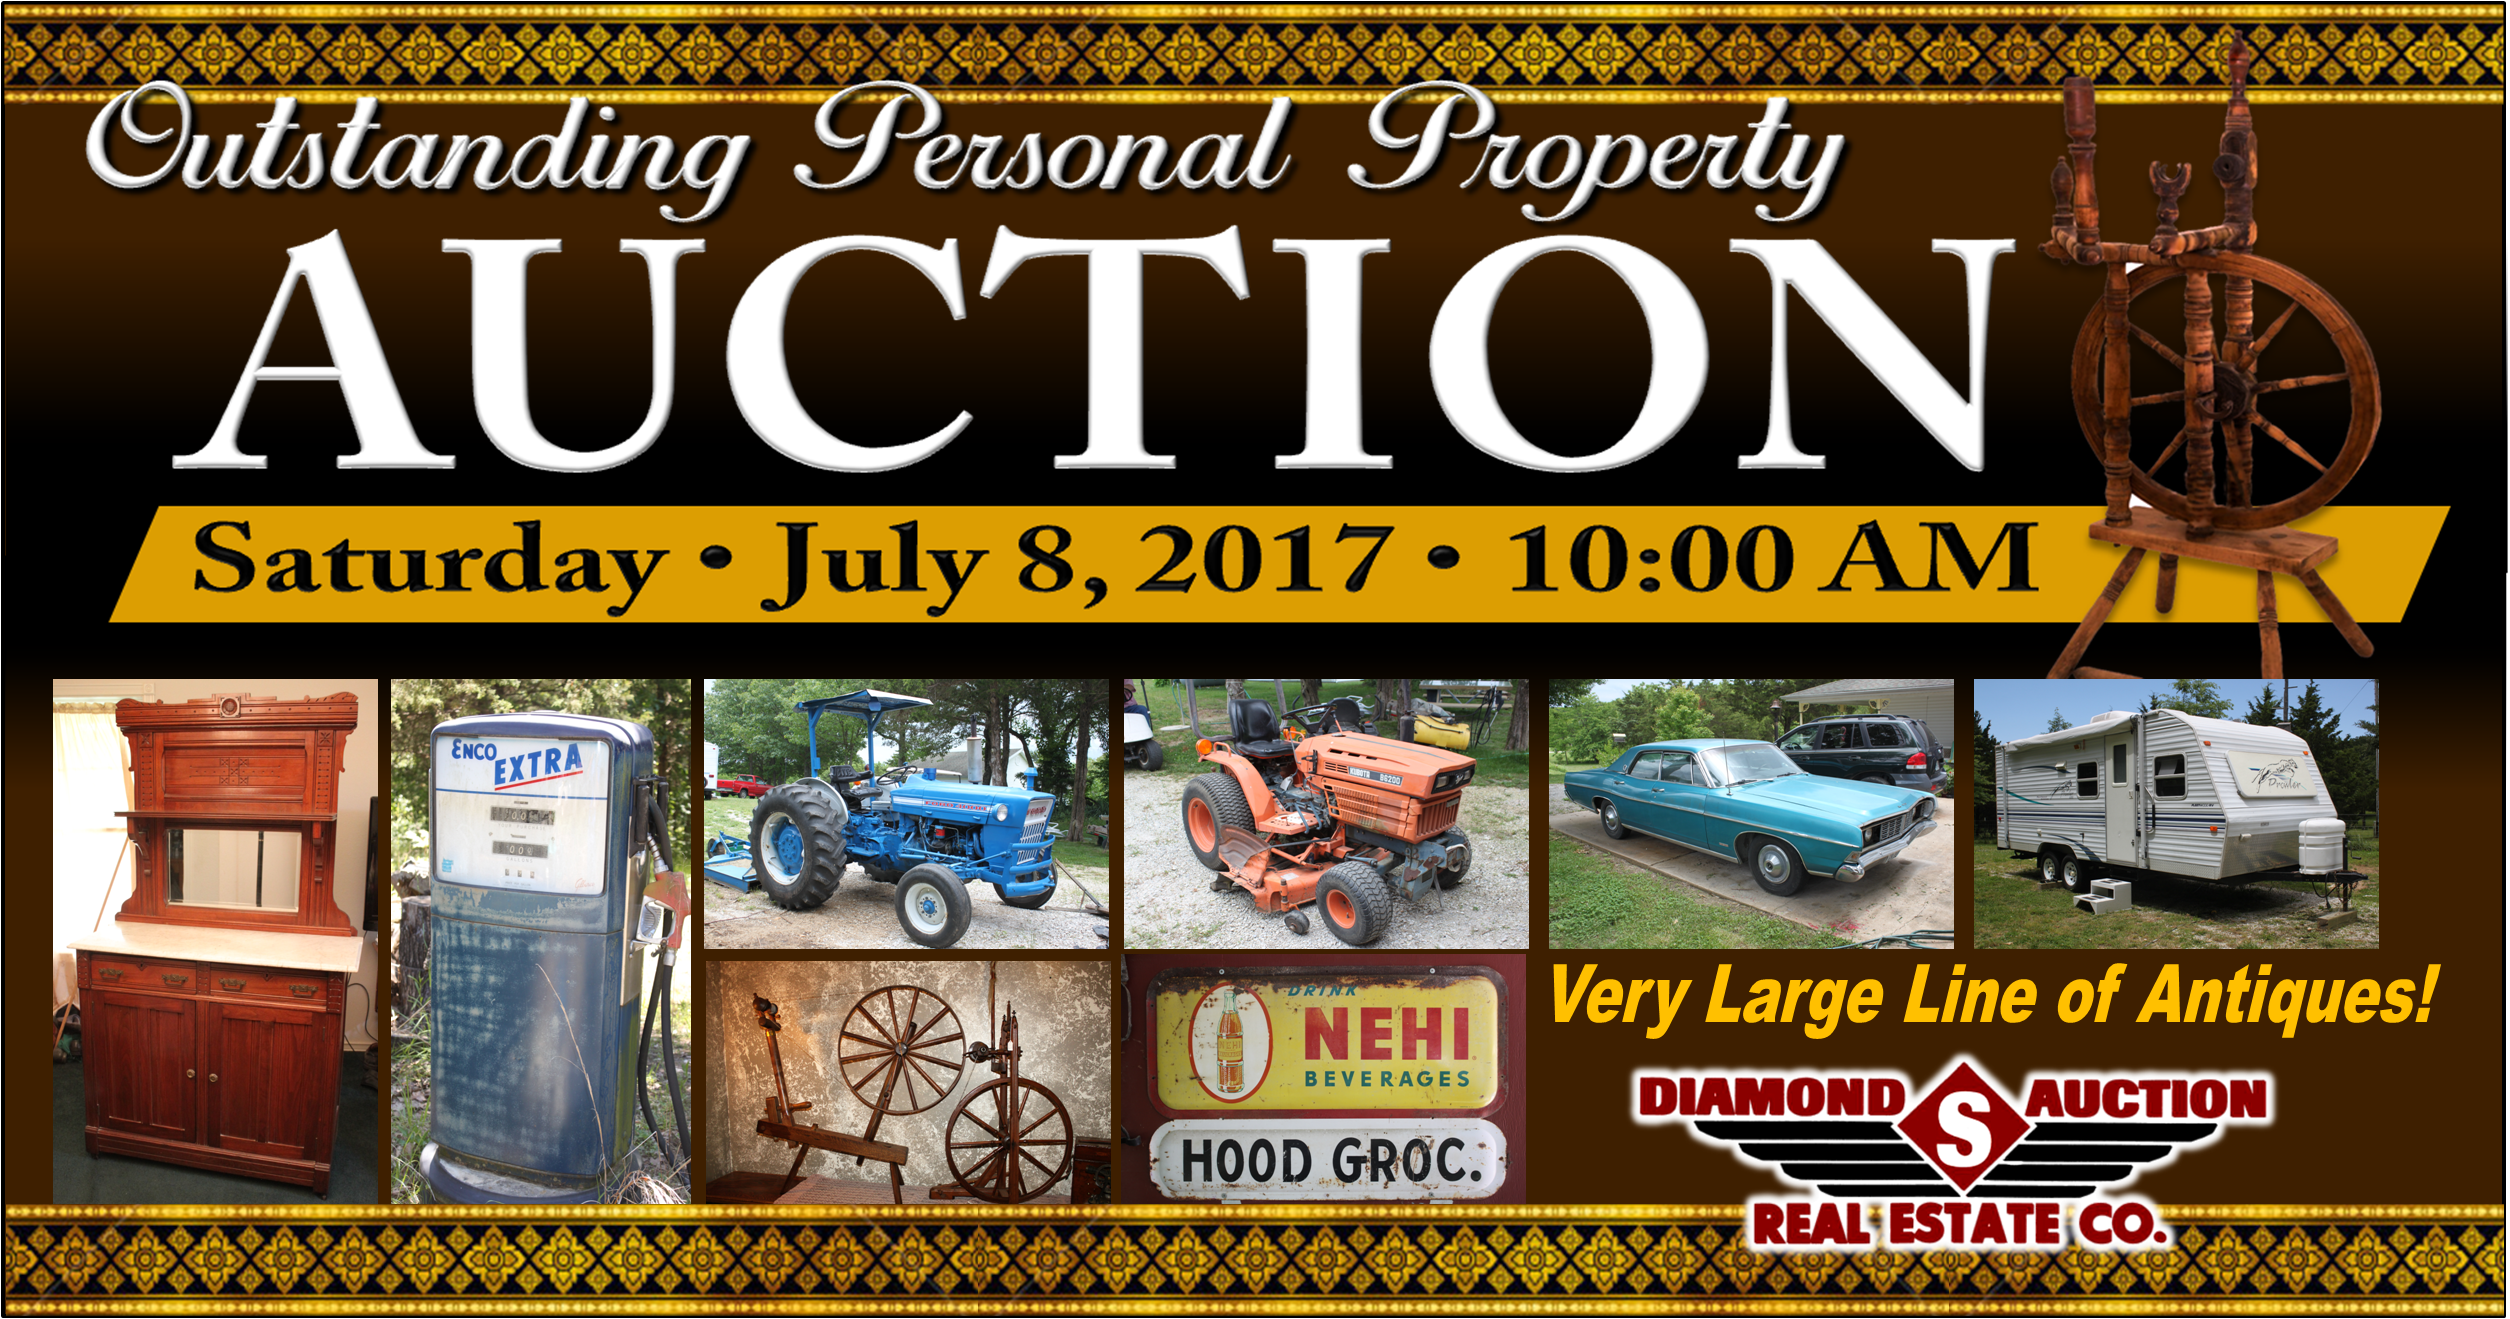 PERSONAL PROPERTY AUCTION